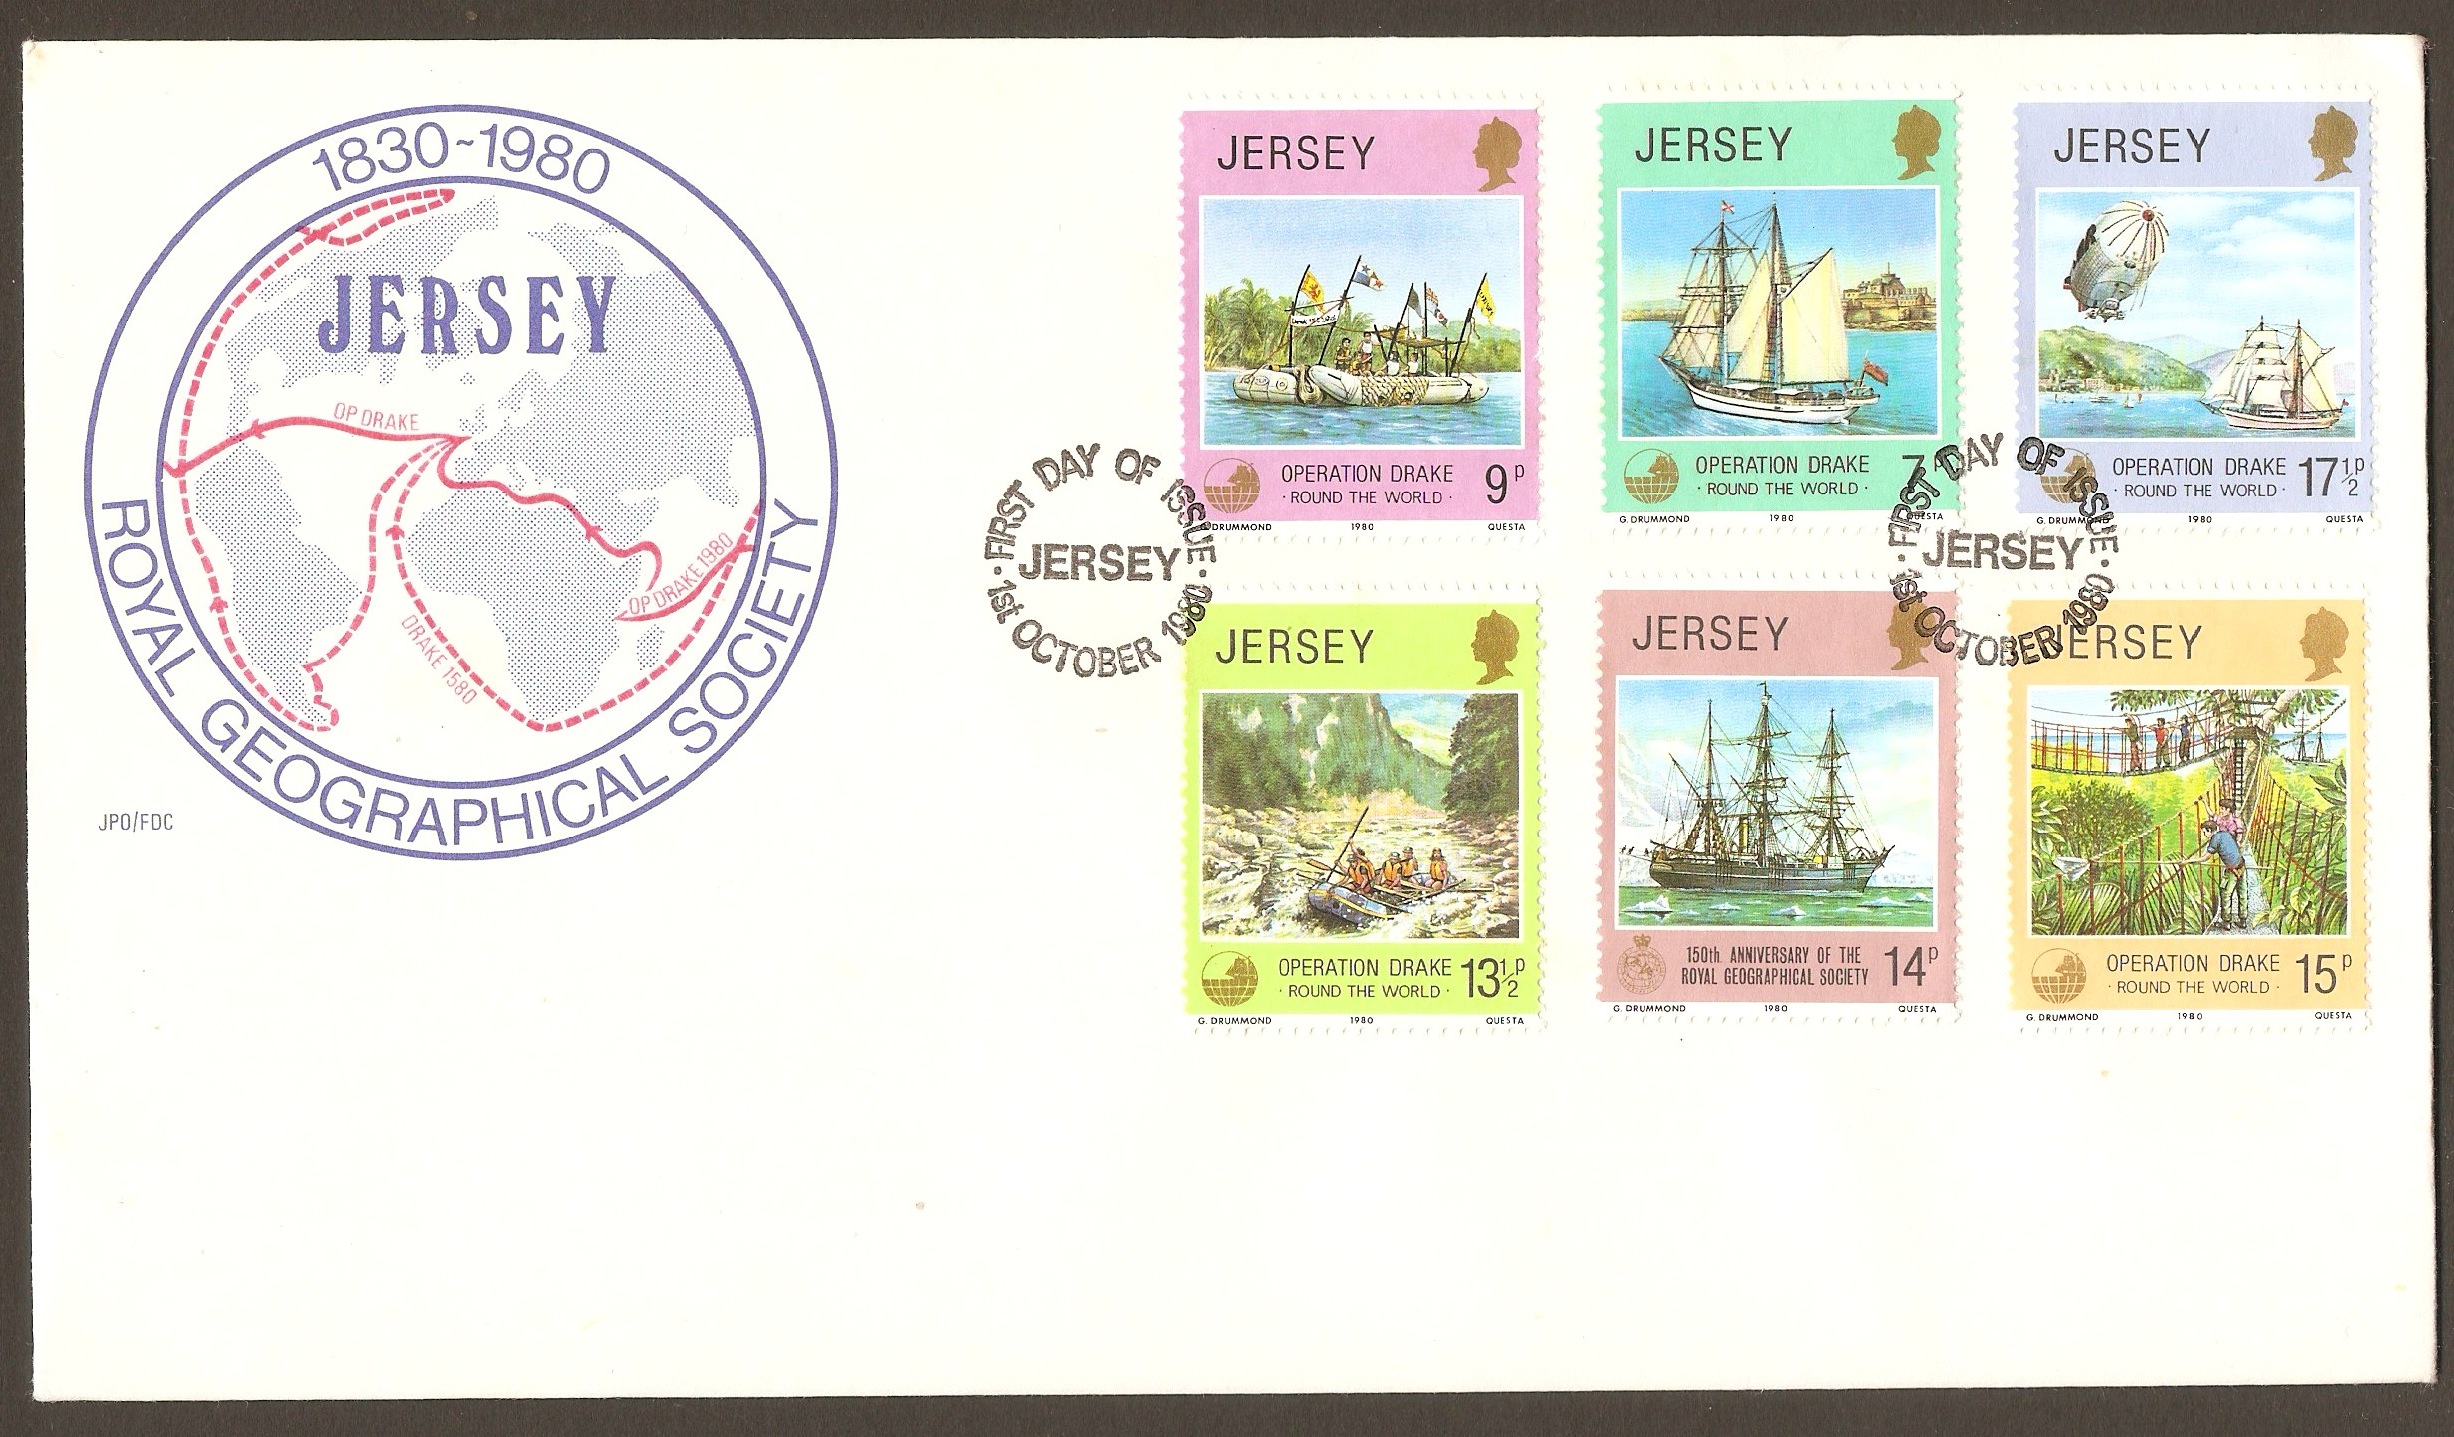 Jersey 1980 Geographical Society Anniv. set FDC.